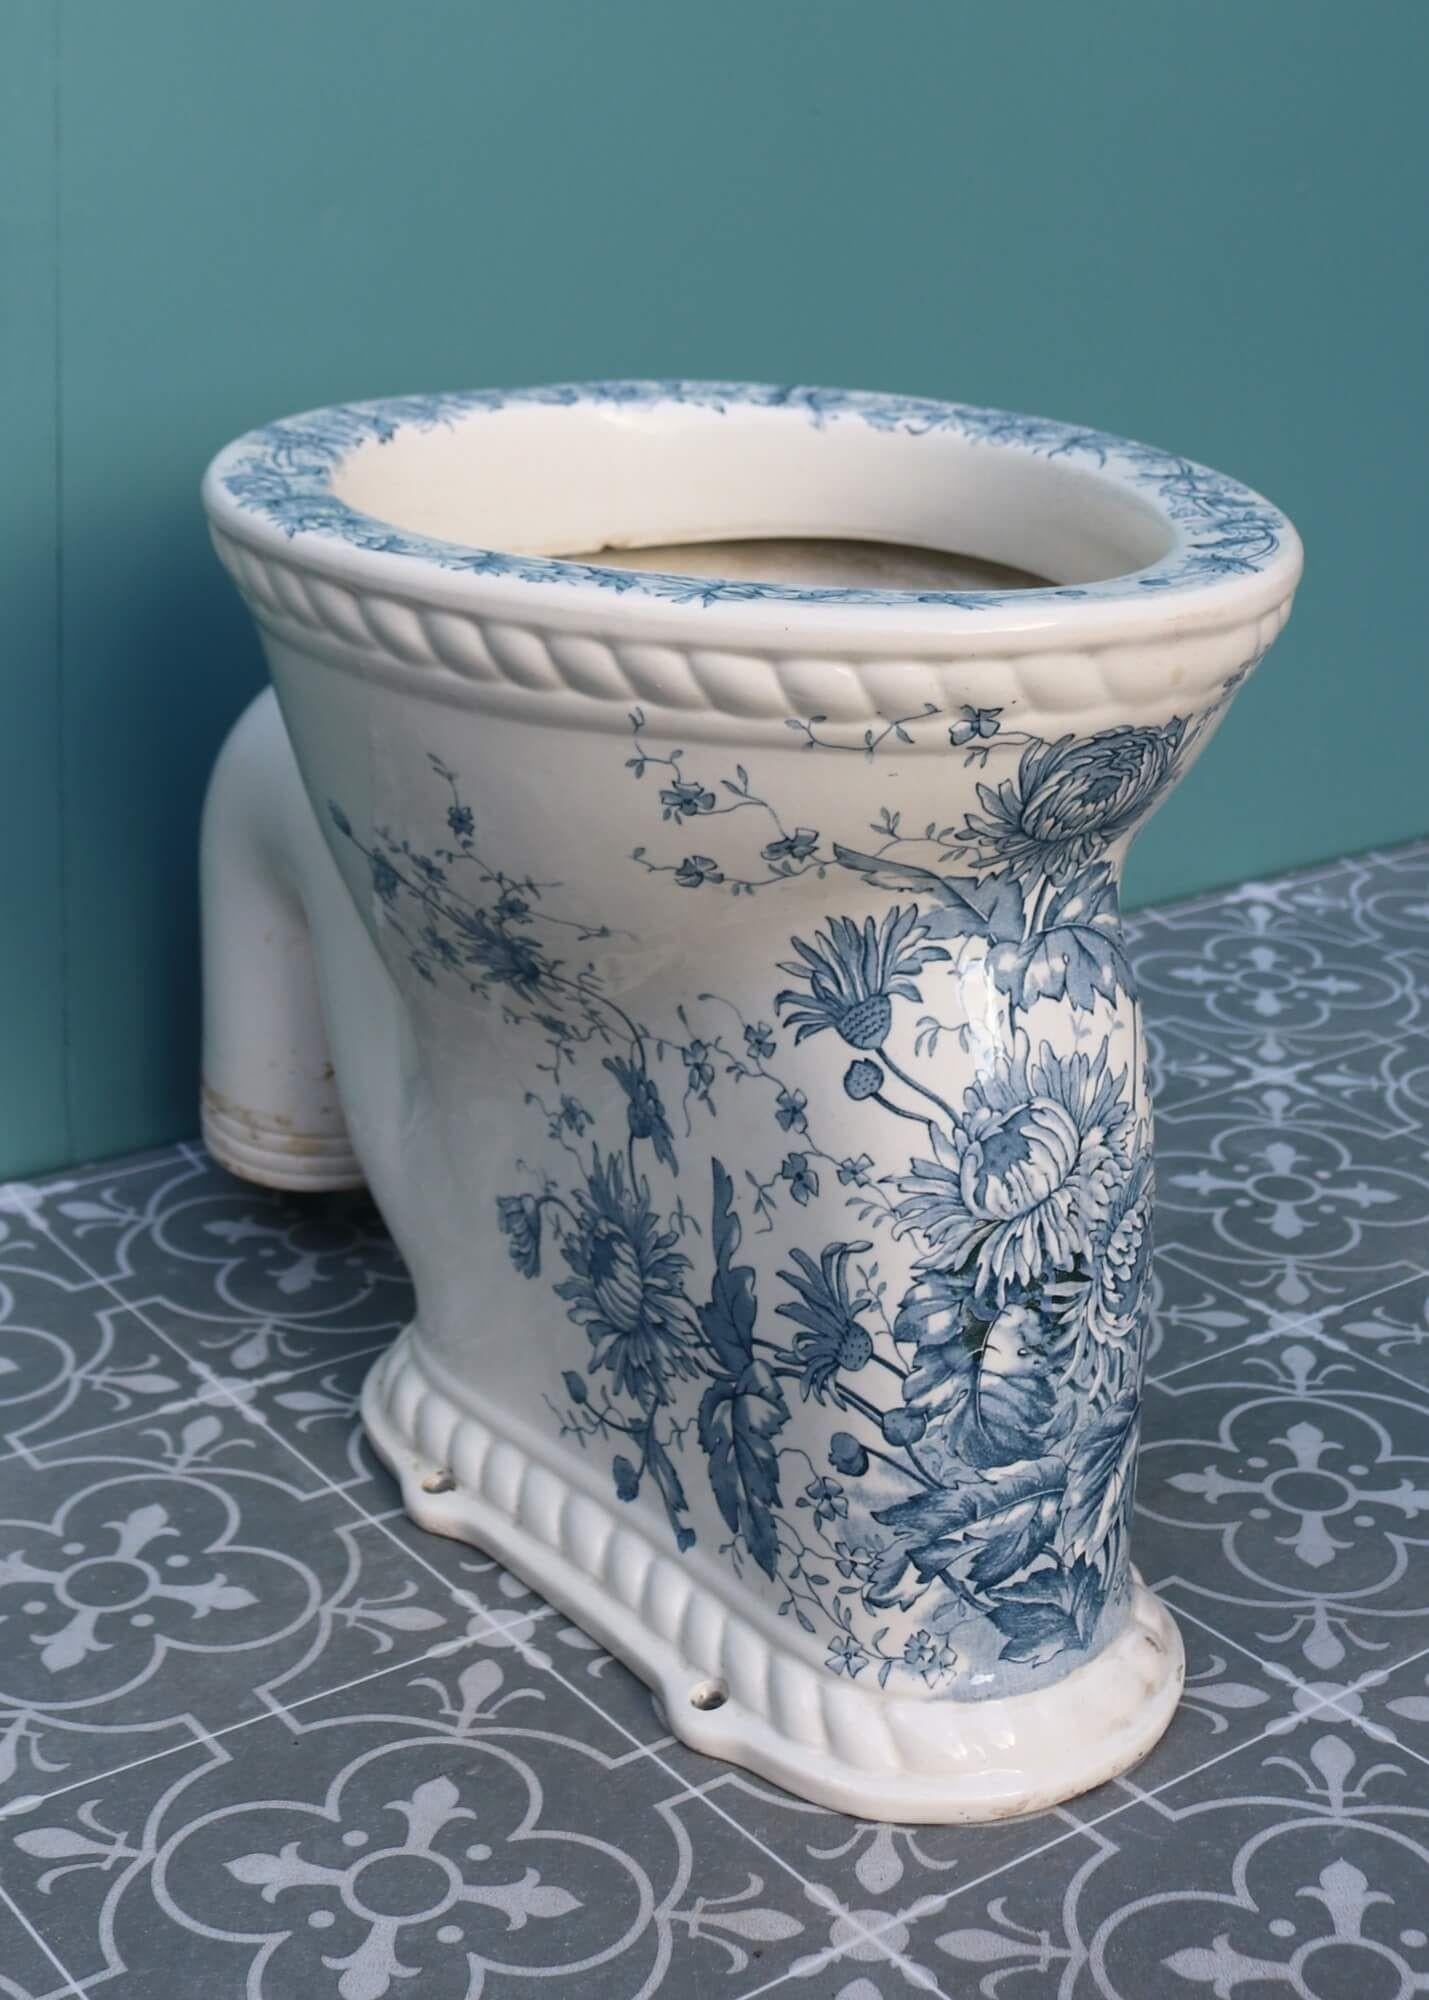 This English ‘Waterfall’ antique Victorian toilet or WC is perfect for a vintage cloakroom or period style restroom. Dating from the 1890s, it is over 130 years old and is in good condition, detailed with beautiful blue and white transfer print